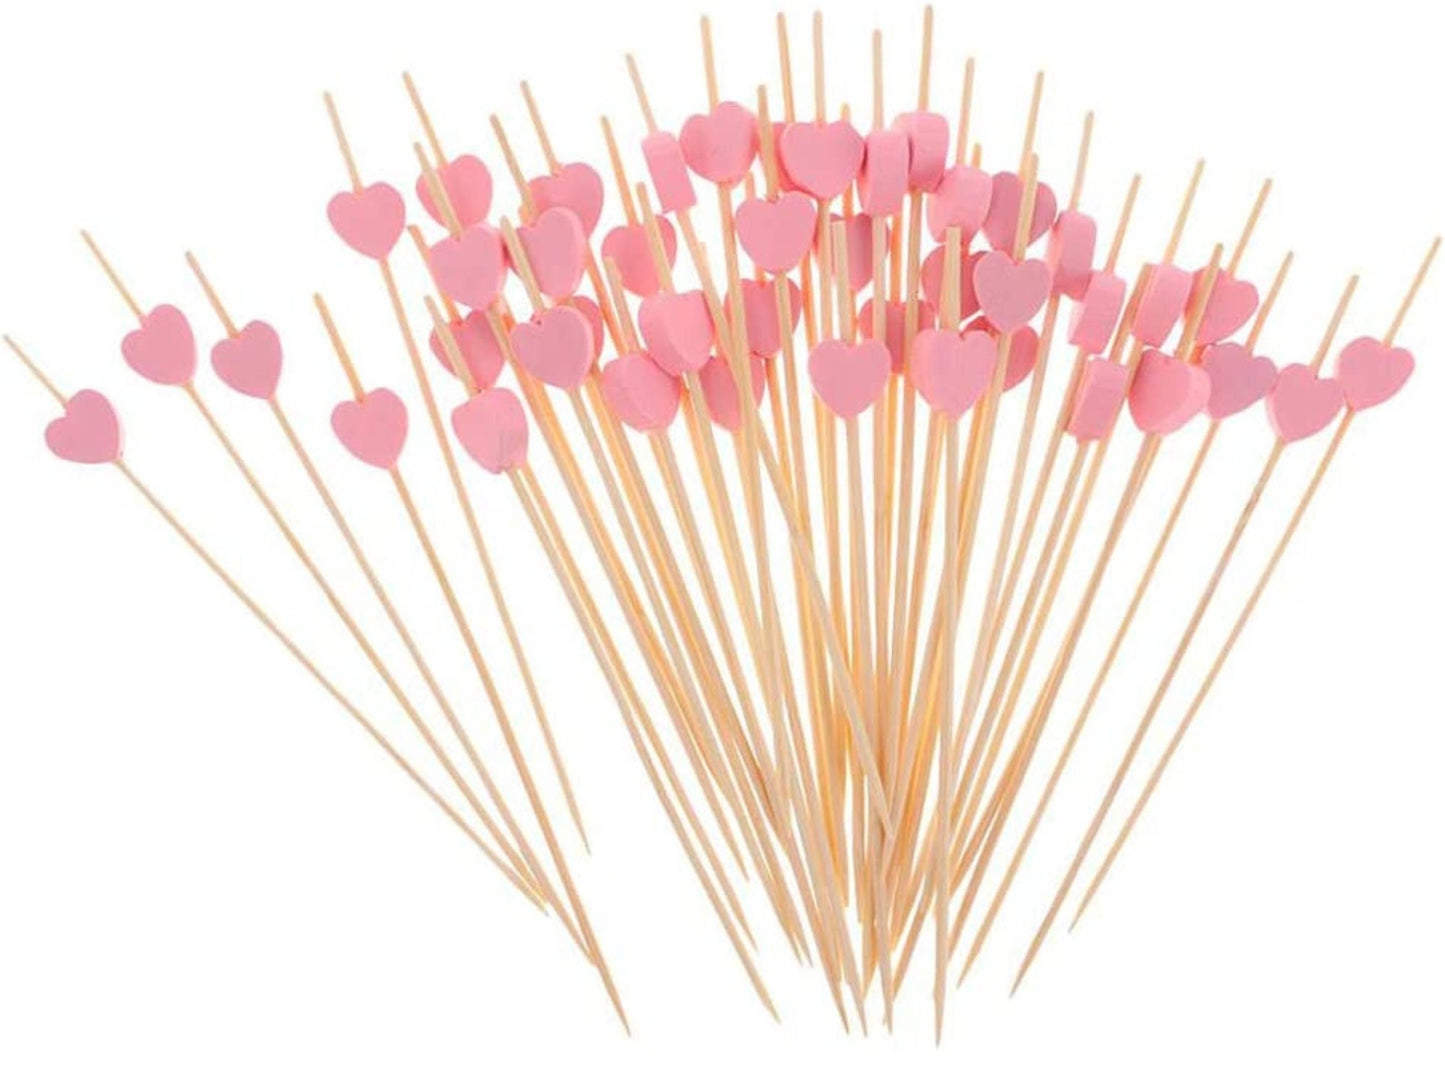 Heart Shaped Bamboo Charcuterie Plates with Fancy Toothpicks for Food Favor Dessert Display